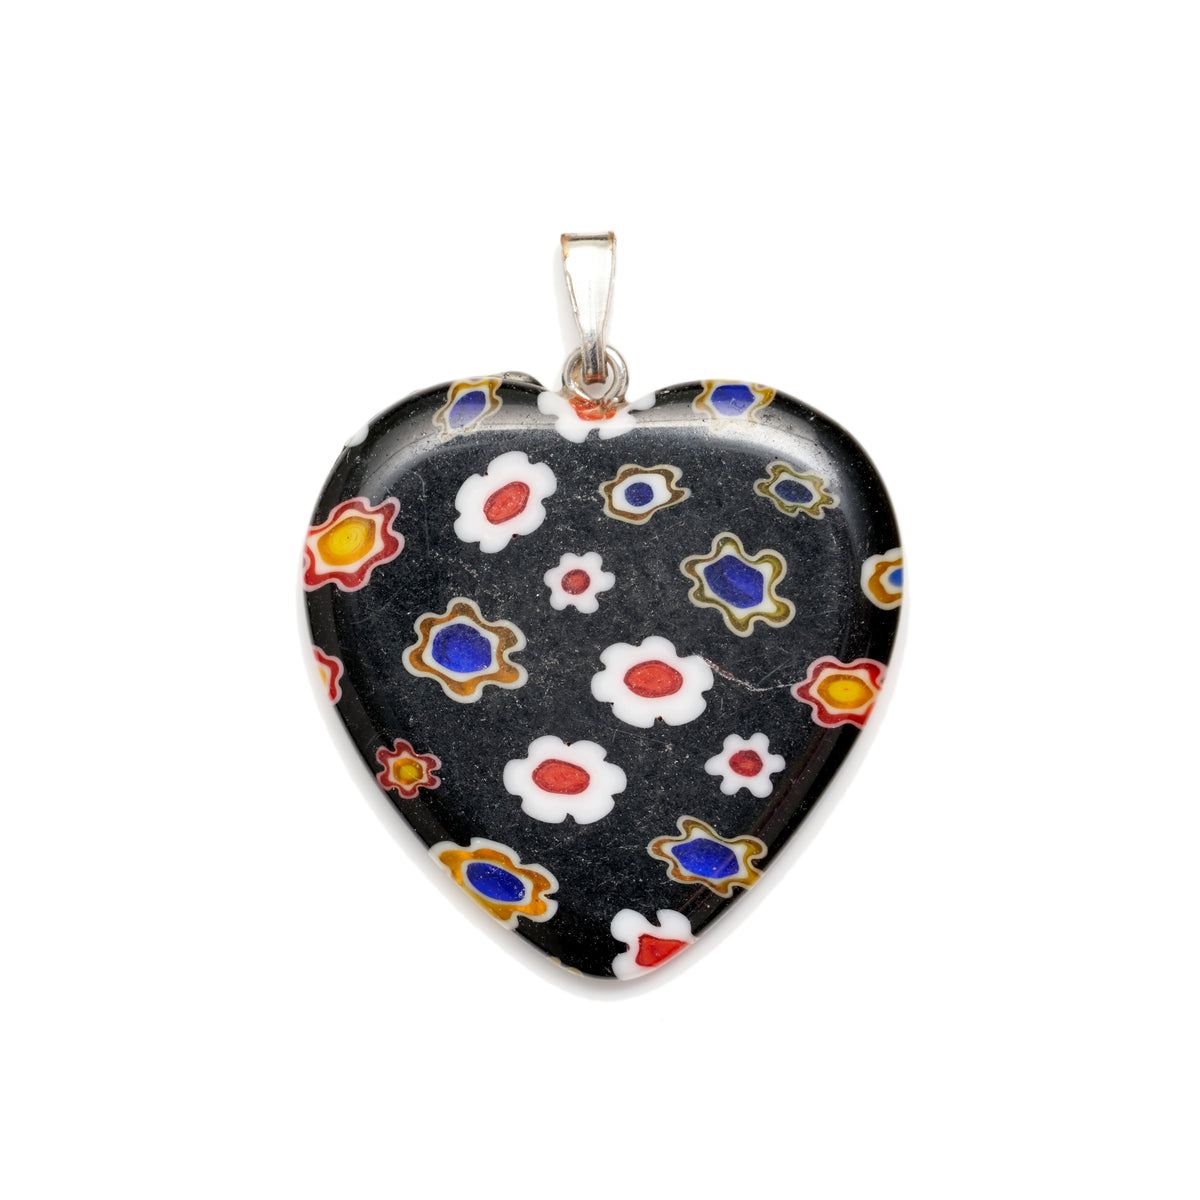 Heart shaped pendant with yellow flower inclusion - Folksy